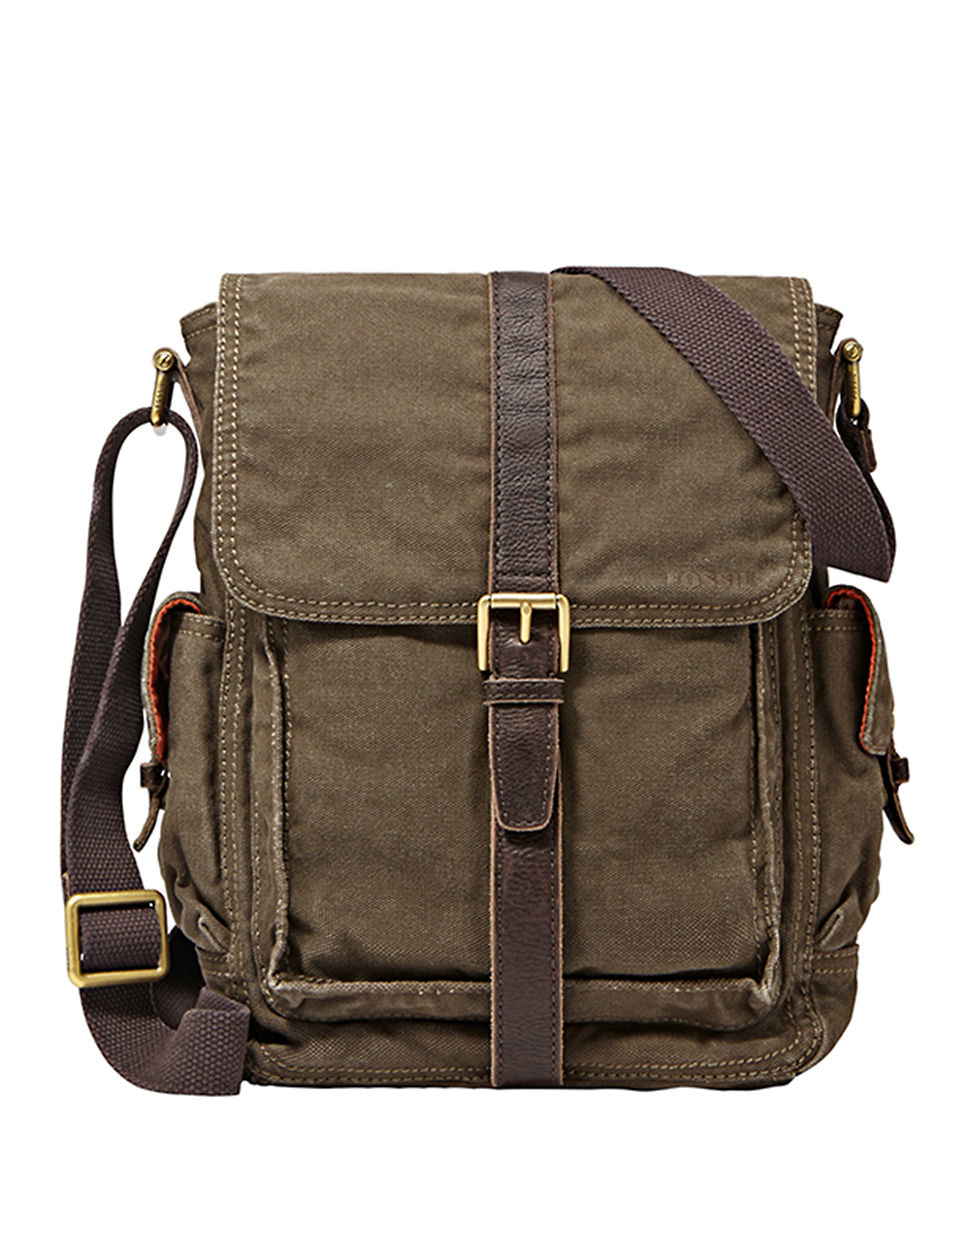 Fossil Leather-Trimmed North/South Commuter Bag in Green for Men - Lyst